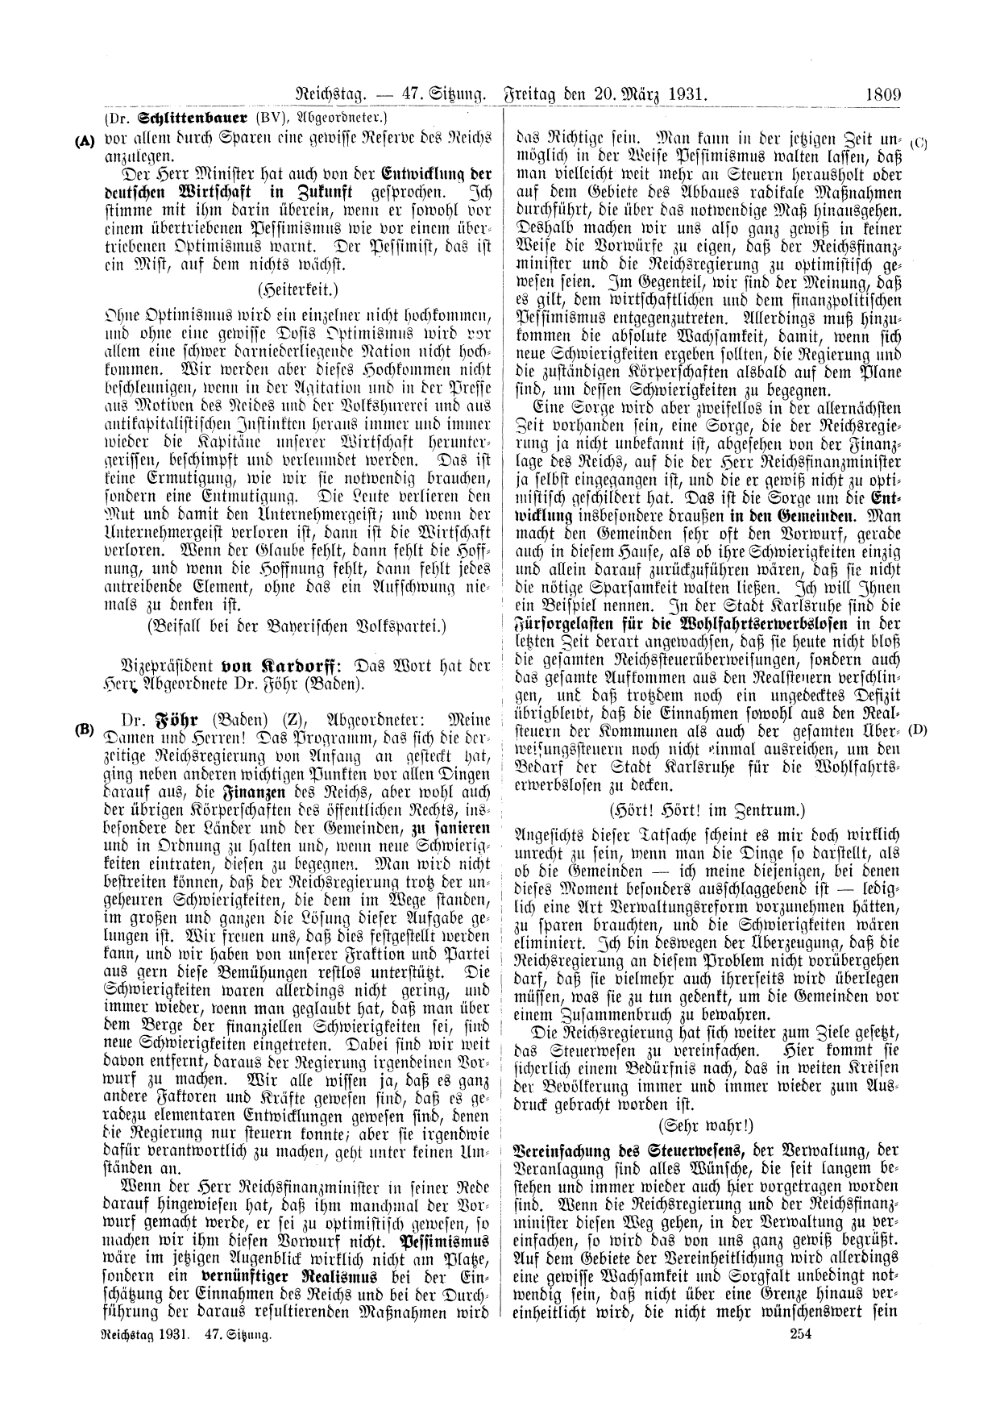 Scan of page 1809